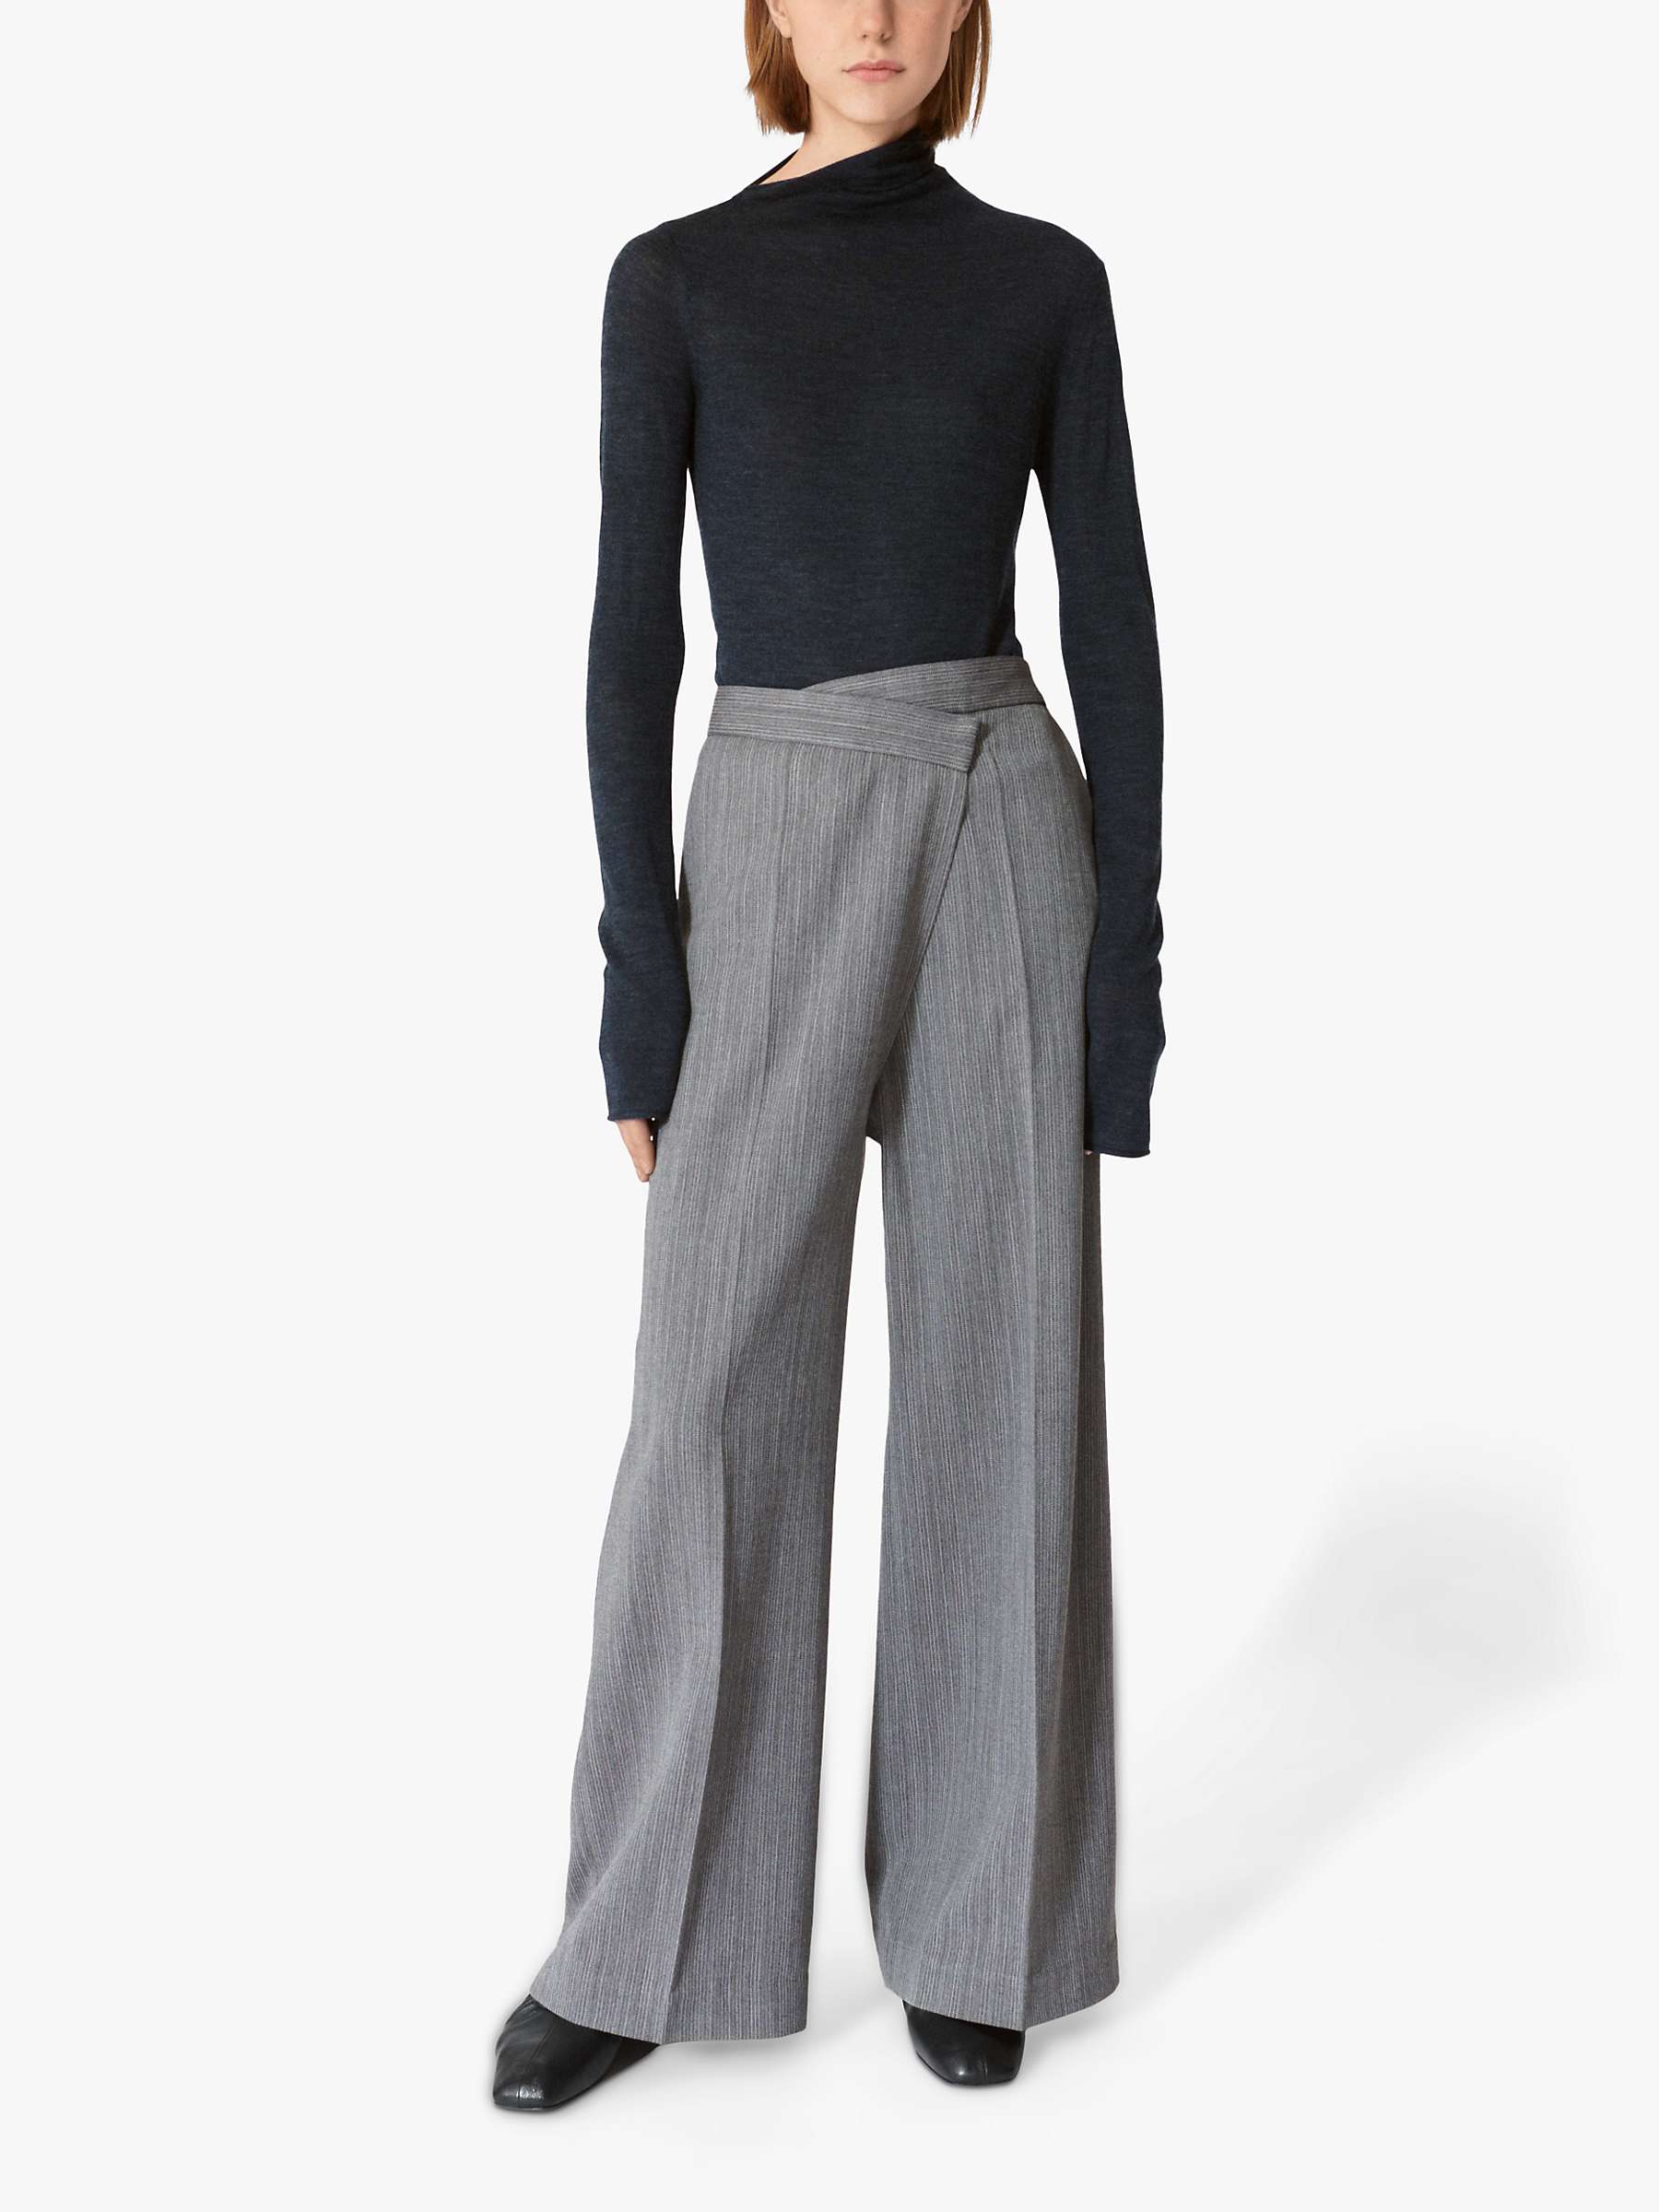 Buy Lovechild 1979 Tabitha Wrap Waist Tailored Trousers, Grey Melange Online at johnlewis.com